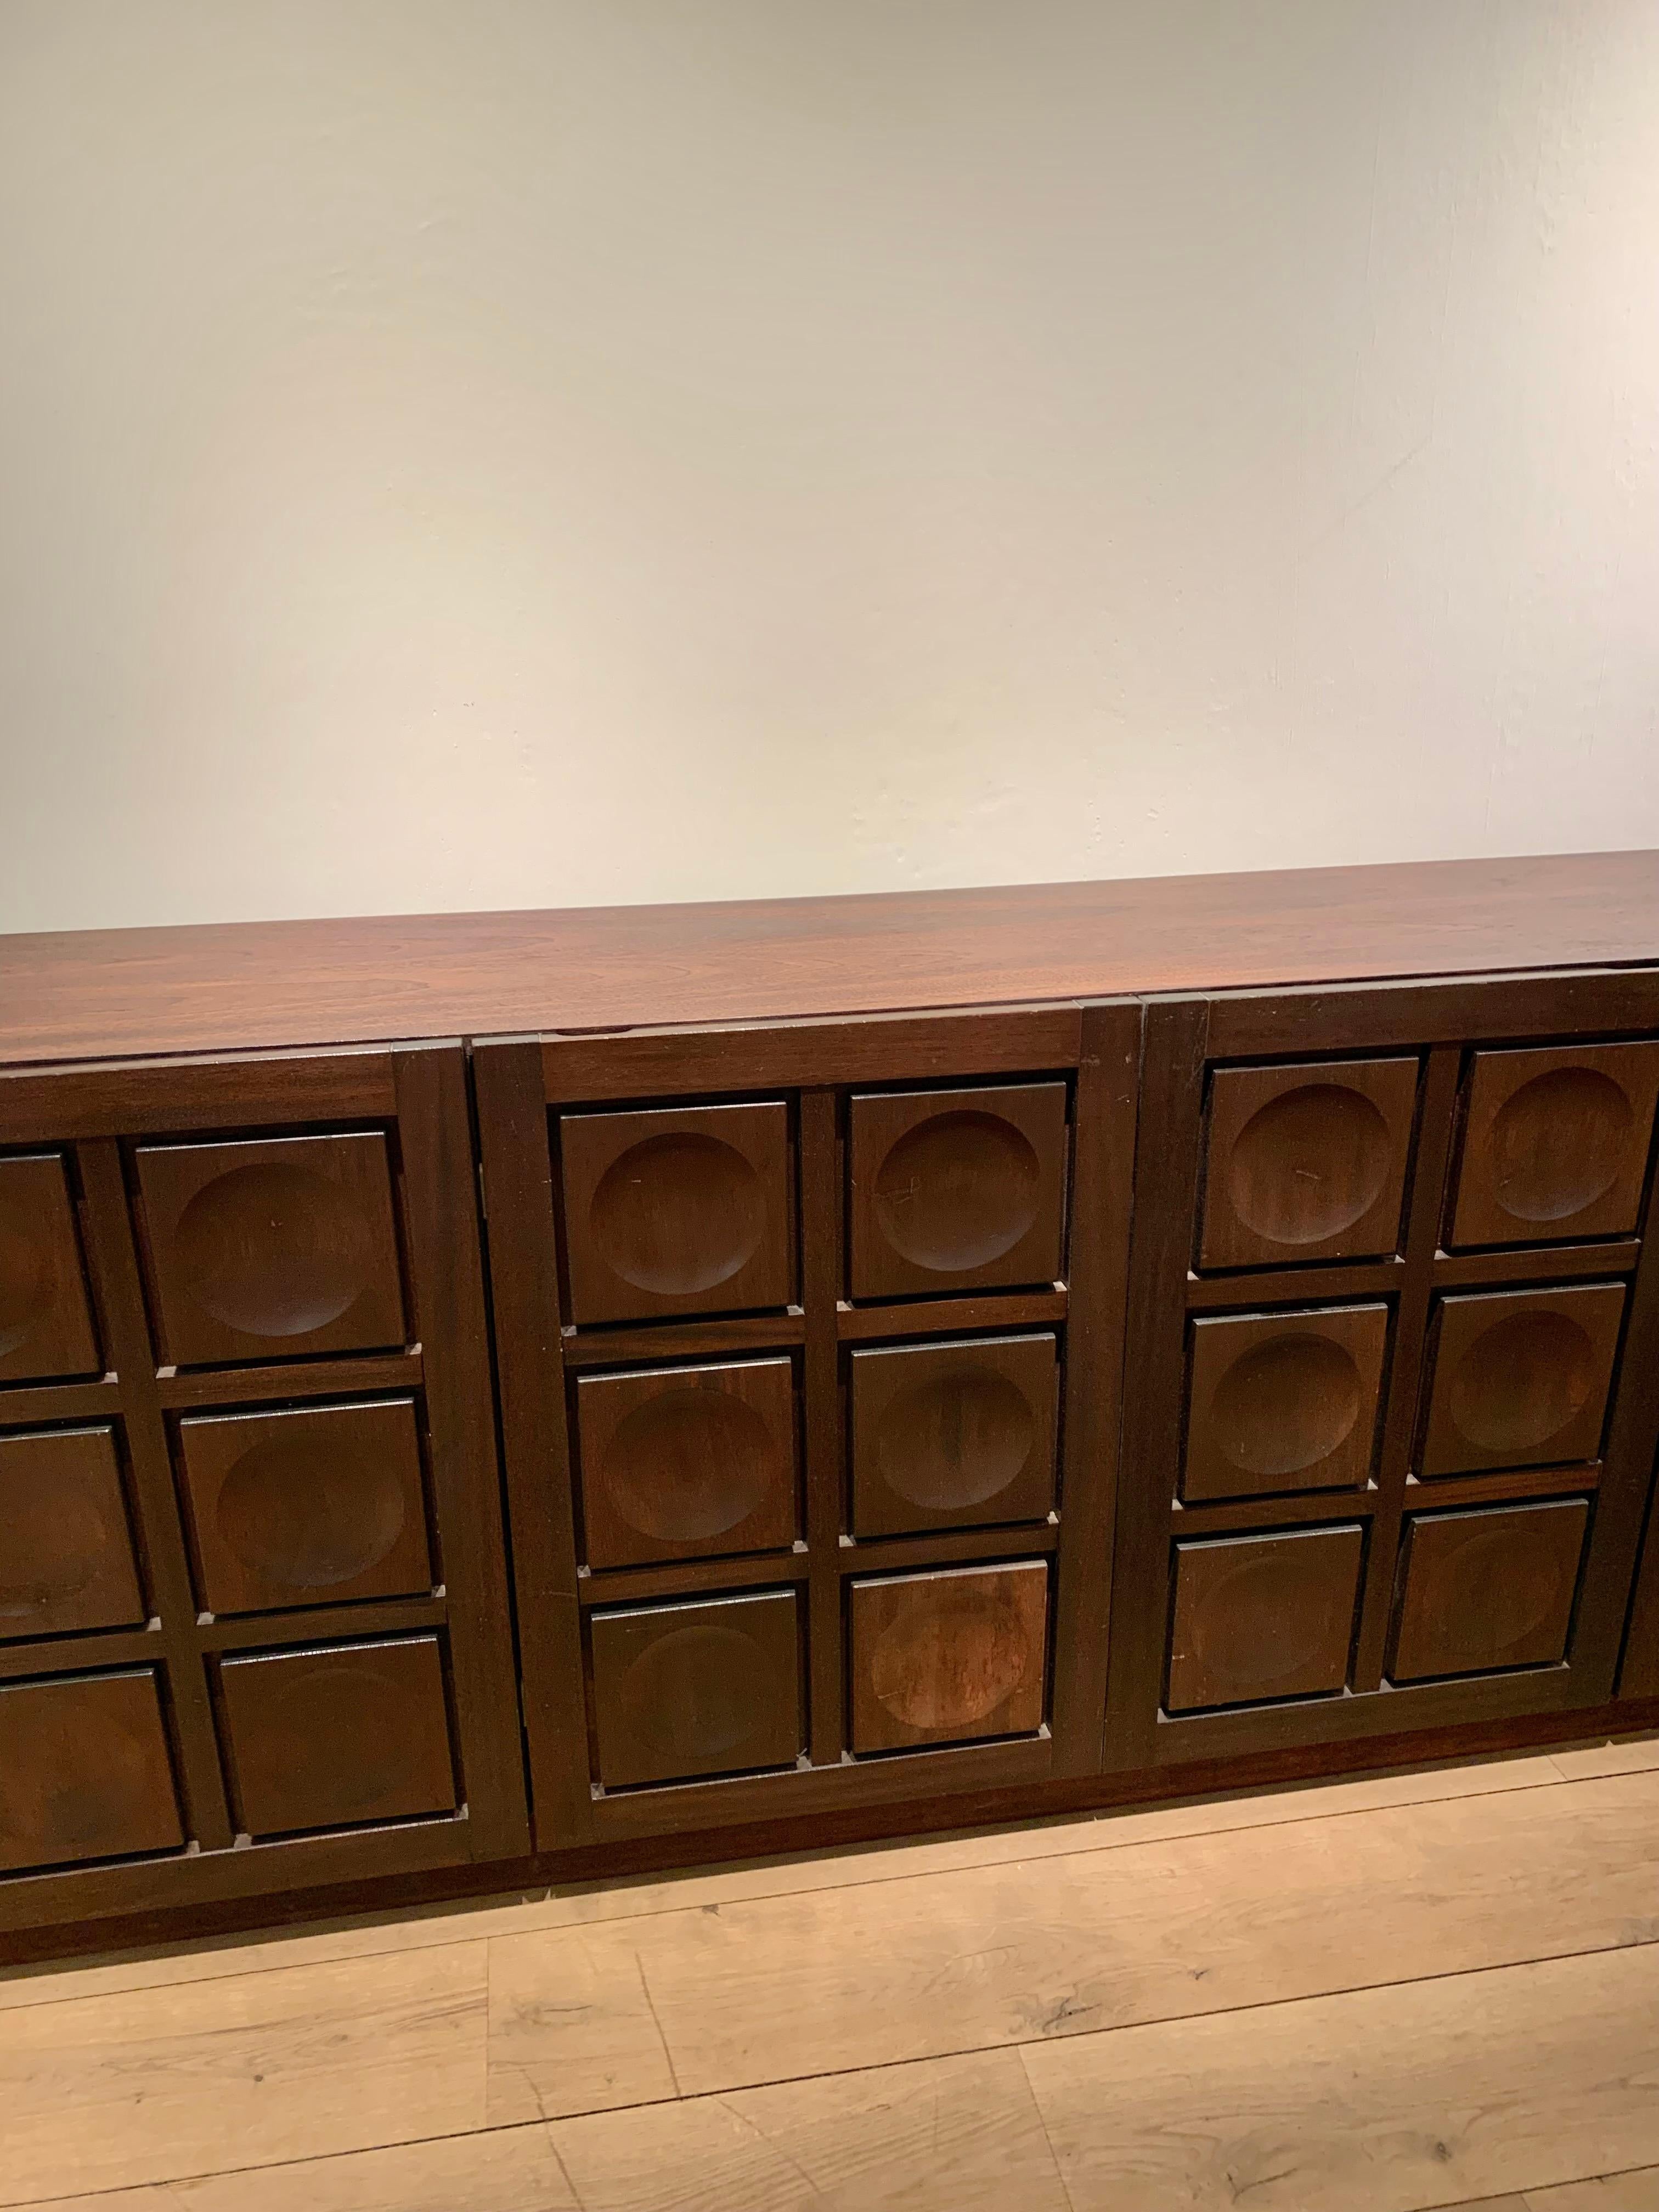 Fabulous large “mahogany” stained oak vintage brutalist French credenza - sideboard with decorative carvings on the five doors. The credenza is very spacious with long shelves for table cloths, napkins, tableware, etc. and has two drawers for